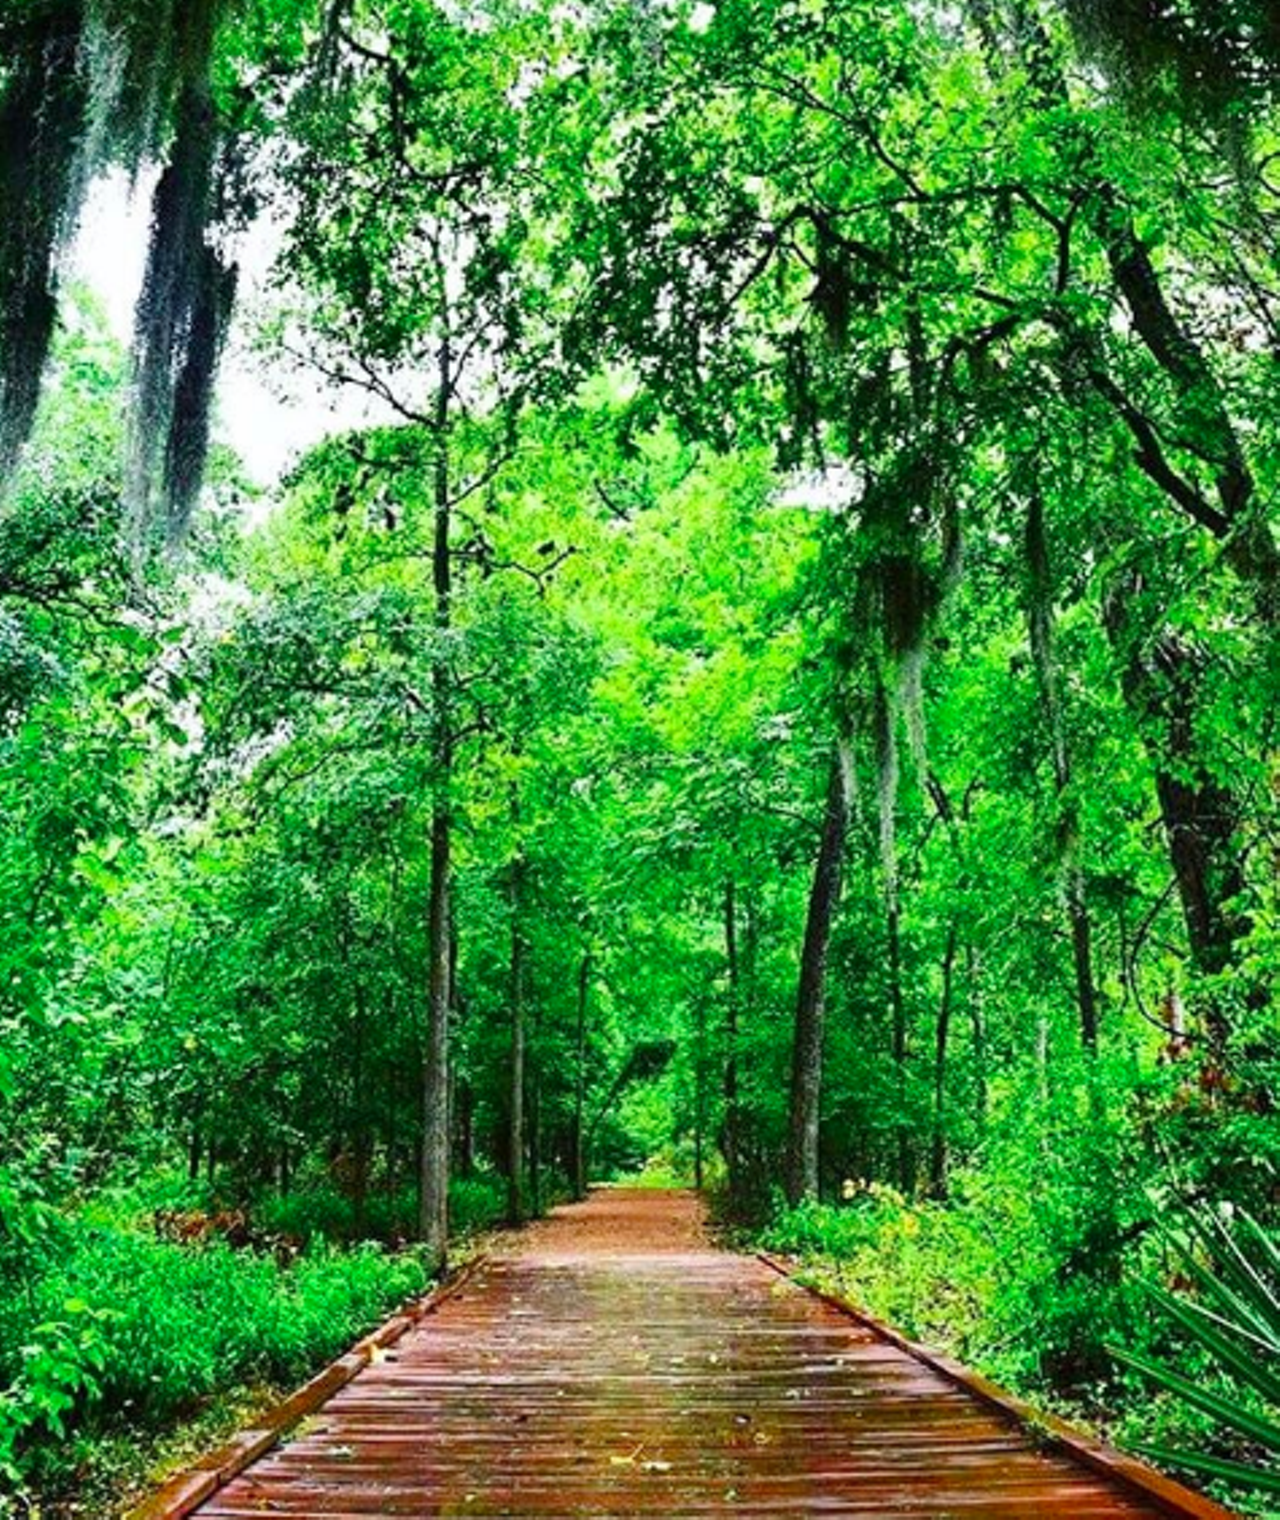 Palmetto State Park
78 Park Road 11 S, Gonzales, (830) 672-3266, tpwd.texas.gov
Just an hour away you’ll find the oases of Palmetto State Park. With multiple water sources, including the San Marcos River, the park is home to a variety of animals and plants. That’s one way to keep little ones entertained. If that doesn’t work, you still have swimming, tubing, finishing and exploring by canoe as well as hiking a LOT.
Photo via Instagram / tawa_ties